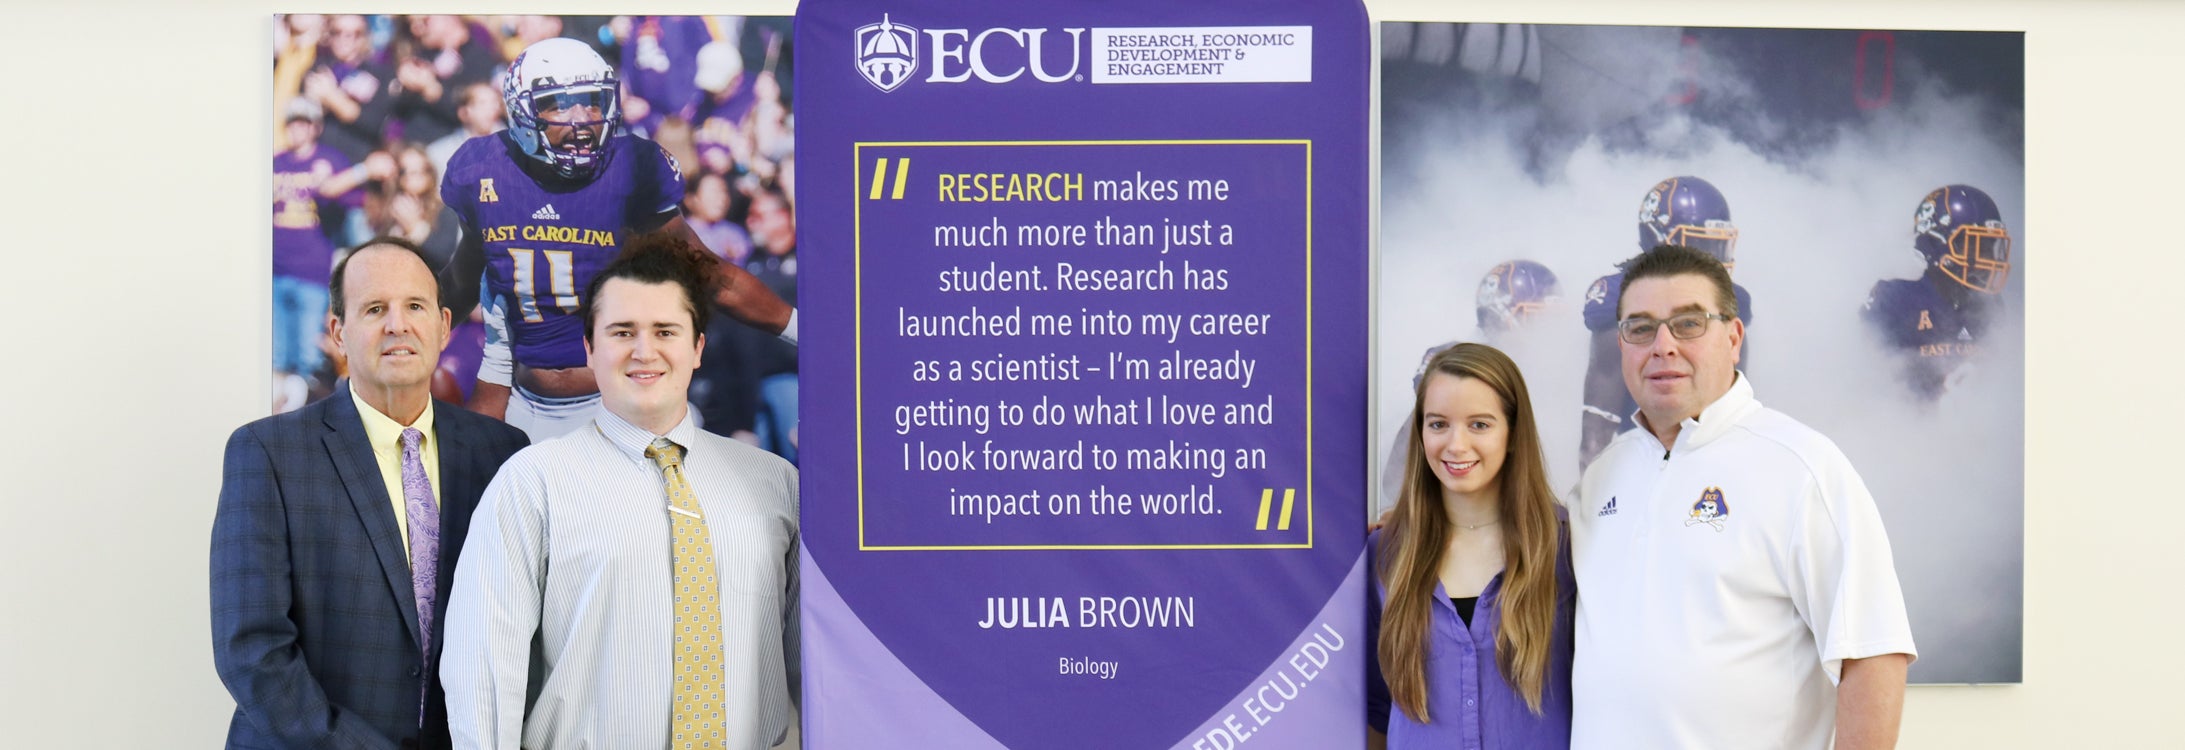 ECU is promoting the growth and success of student research activities at all of our campuses. Pictured above celebrating biology student researcher and cross country runner Julia Brown (center right) are Dr. Jay Golden (from left), Brown’s research partner Matthew Chilton, and Men’s and Women’s Cross Country Director Curt Kraft. (Photos by Matt Smith)